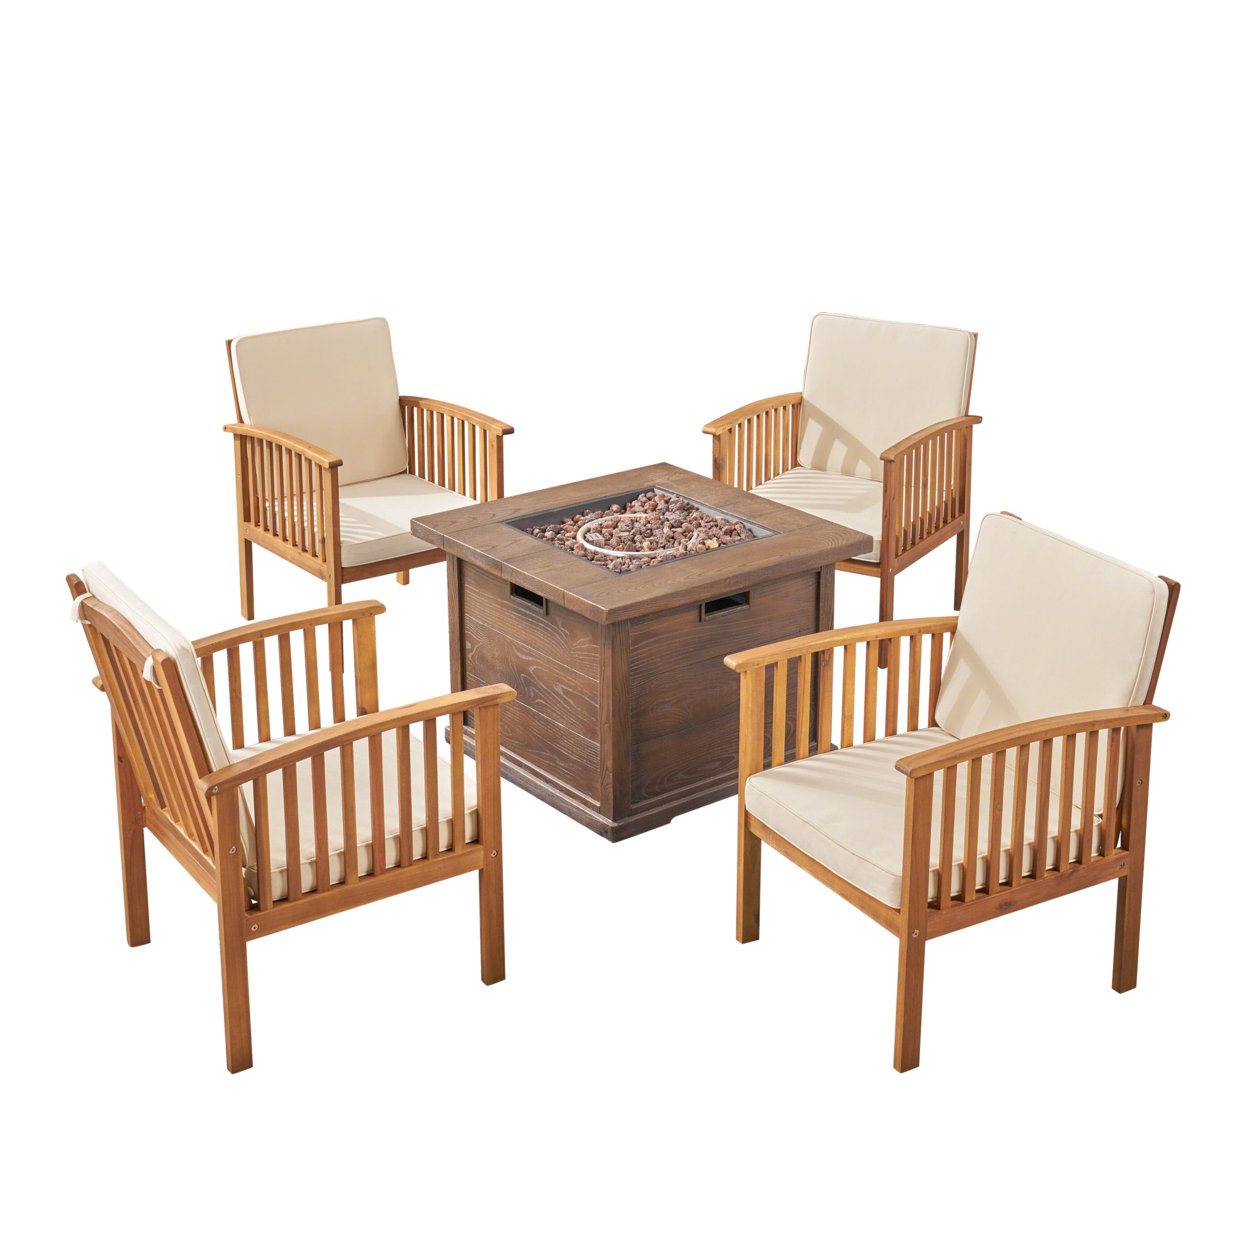 Carol Outdoor 4-Seater Acacia Wood Club Chairs With Firepit - Brown Patina Finish + Cream + Brown + Wood Pattern